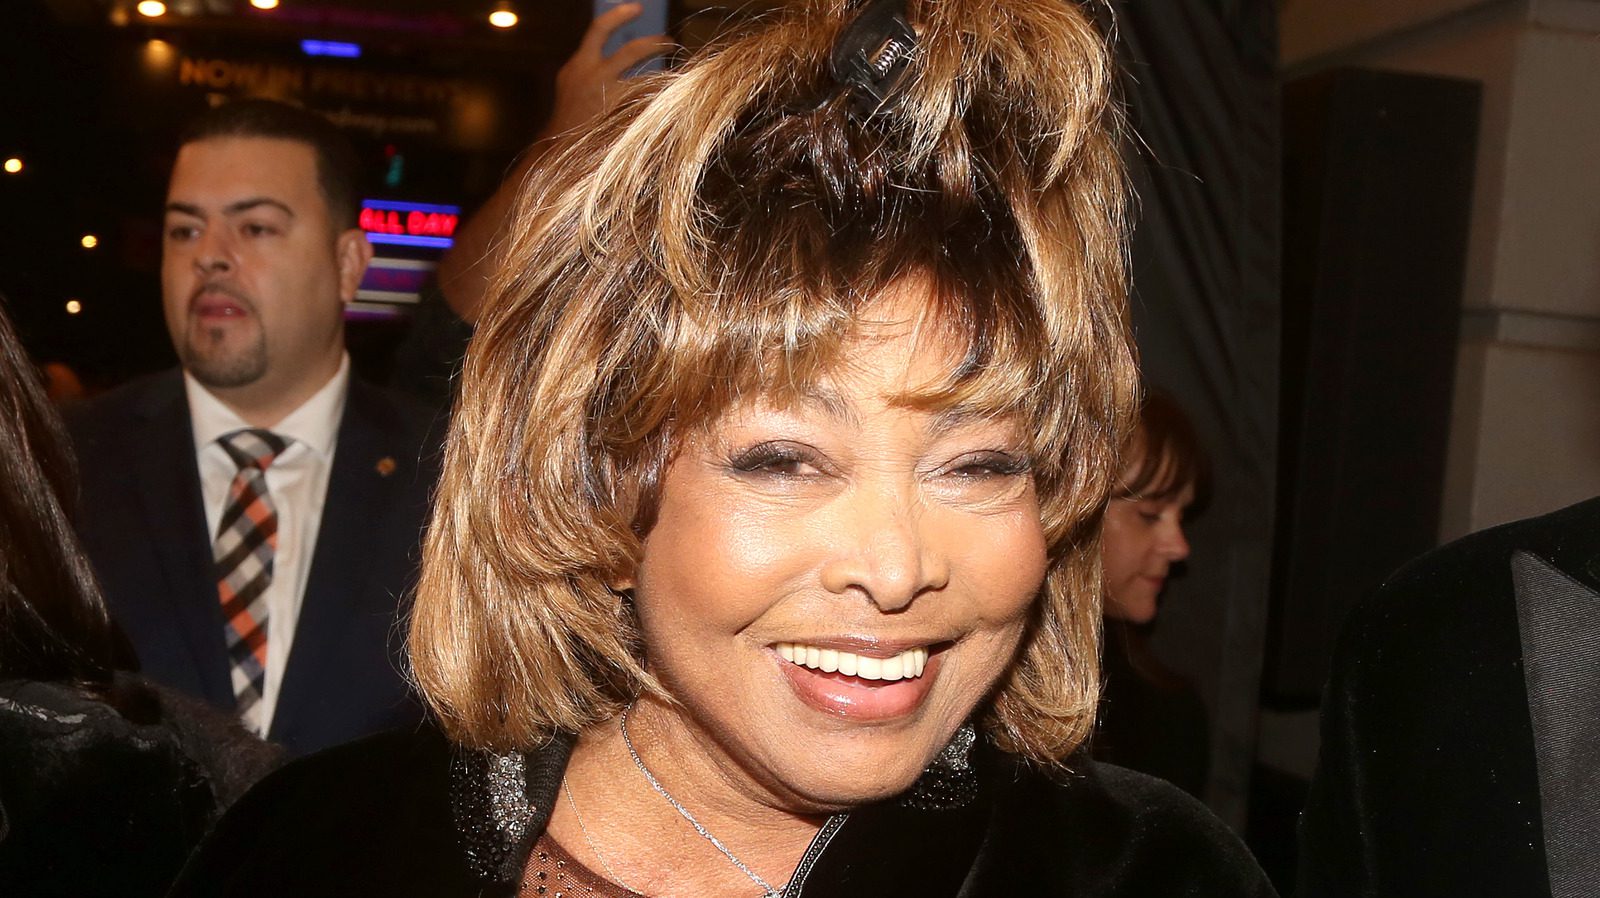 The Last Movie Tina Turner Was In Before She Died